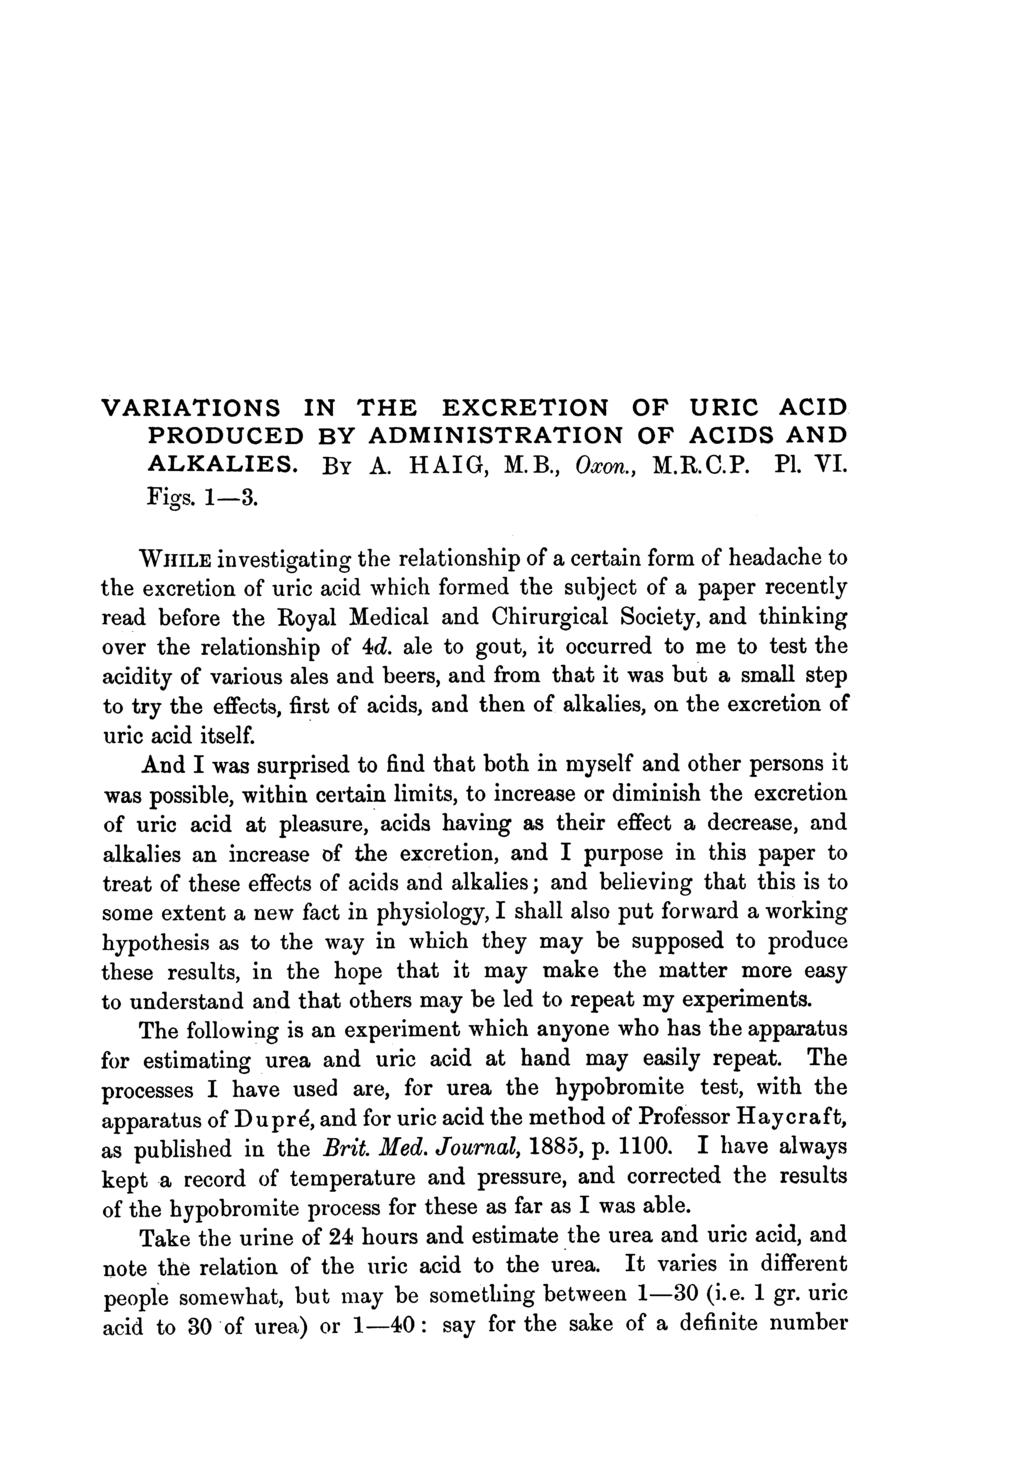 VARIATIONS IN THE EXCRETION OF URIC ACID PRODUCED BY ADMINISTRATION OF ACIDS AND ALKALIES. BY A. HAIG, M.B., Oxon., M.R.C.P. P1. VI. Figs. 1-3.